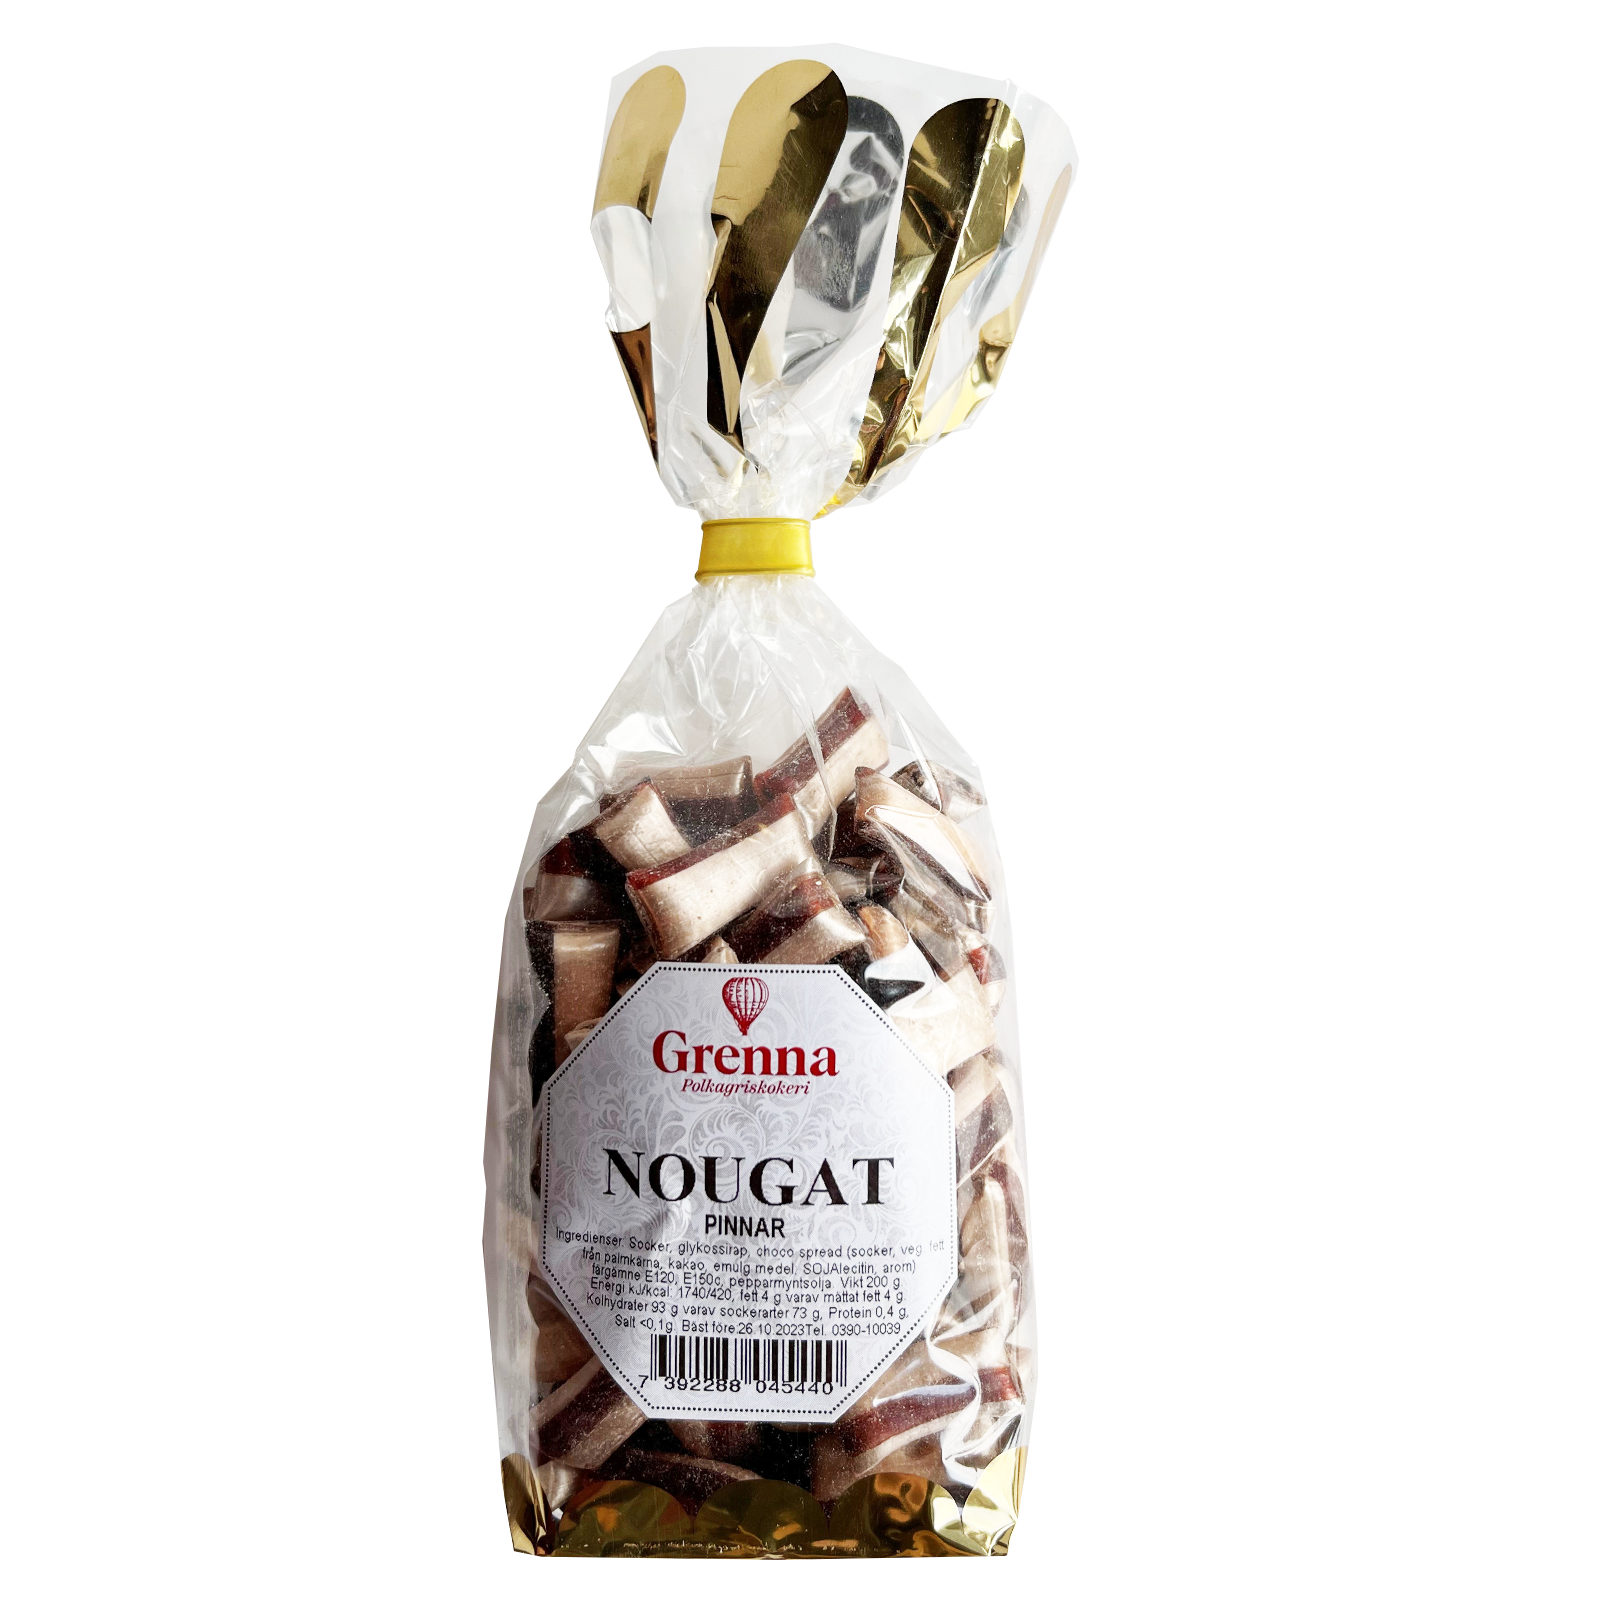 Chocolate filled nougat sweets